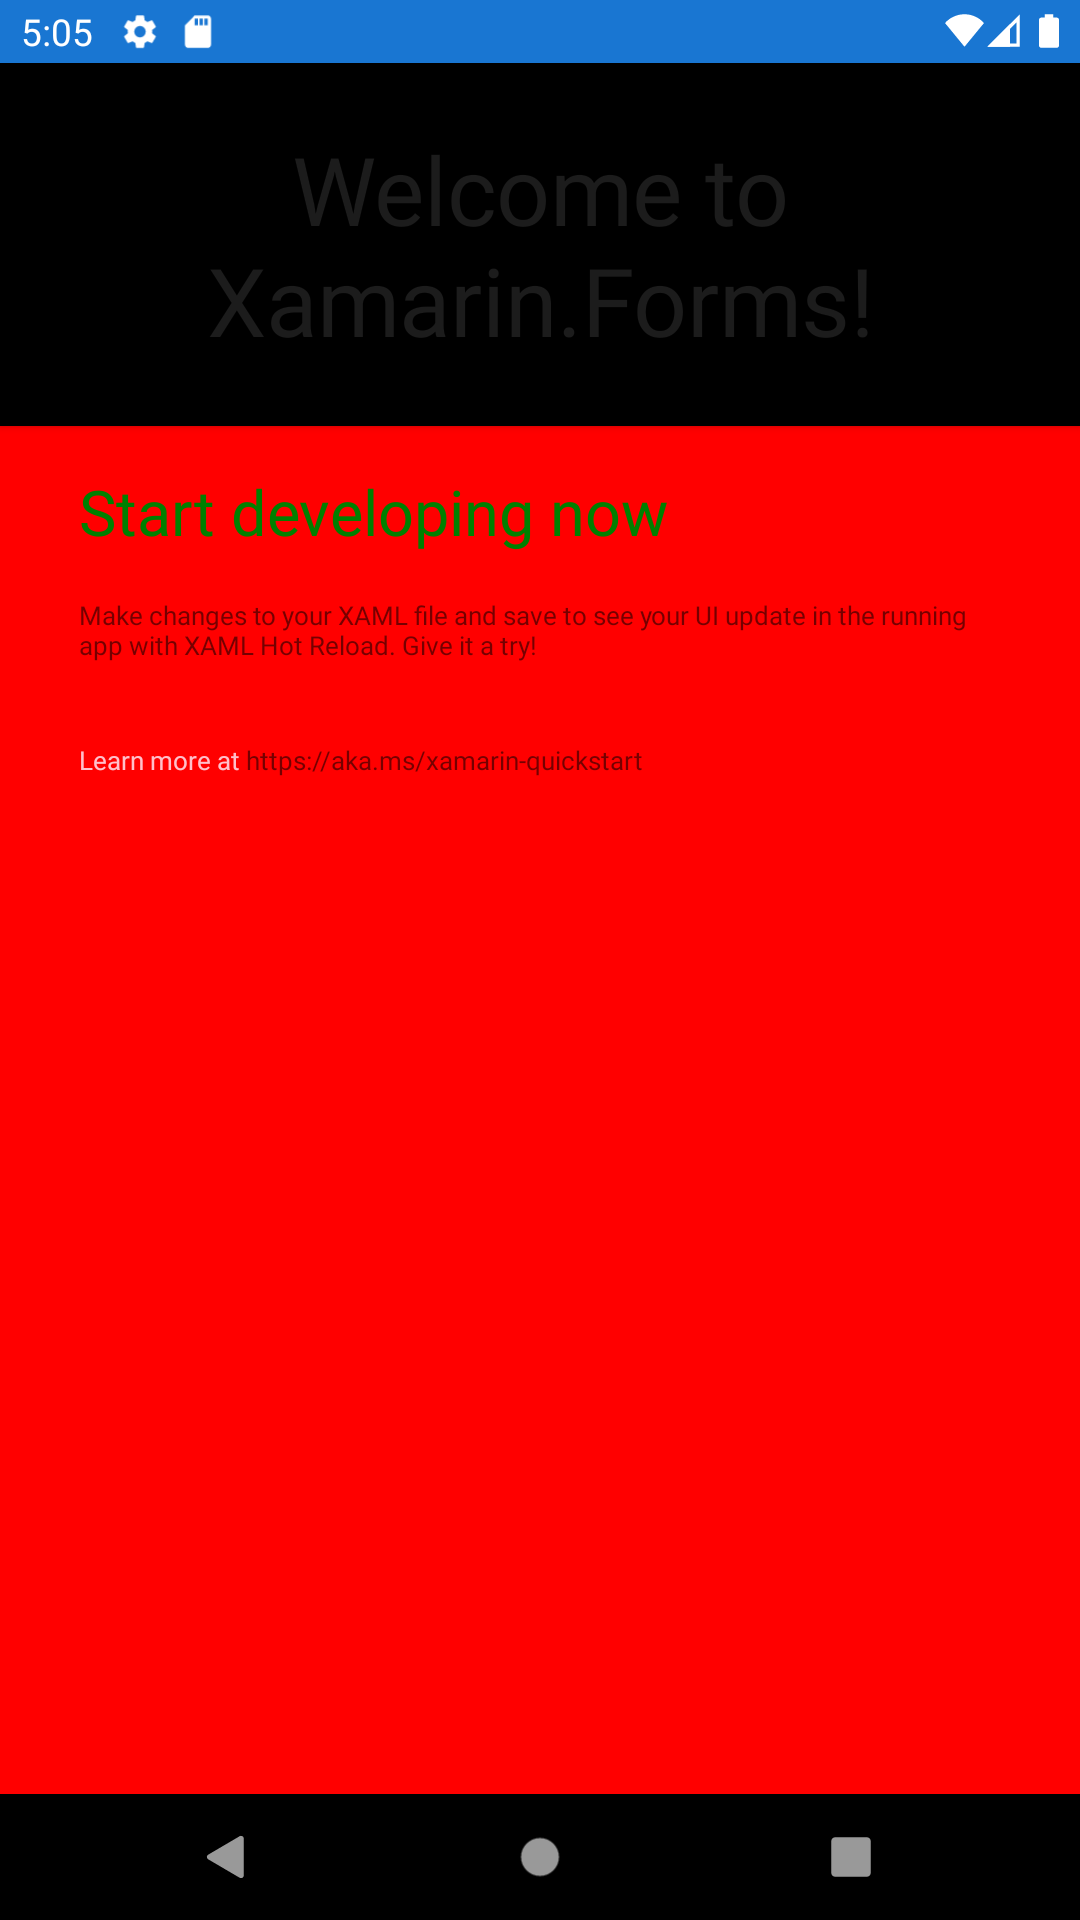 Screenshot of an ugly, inaccessible app sample